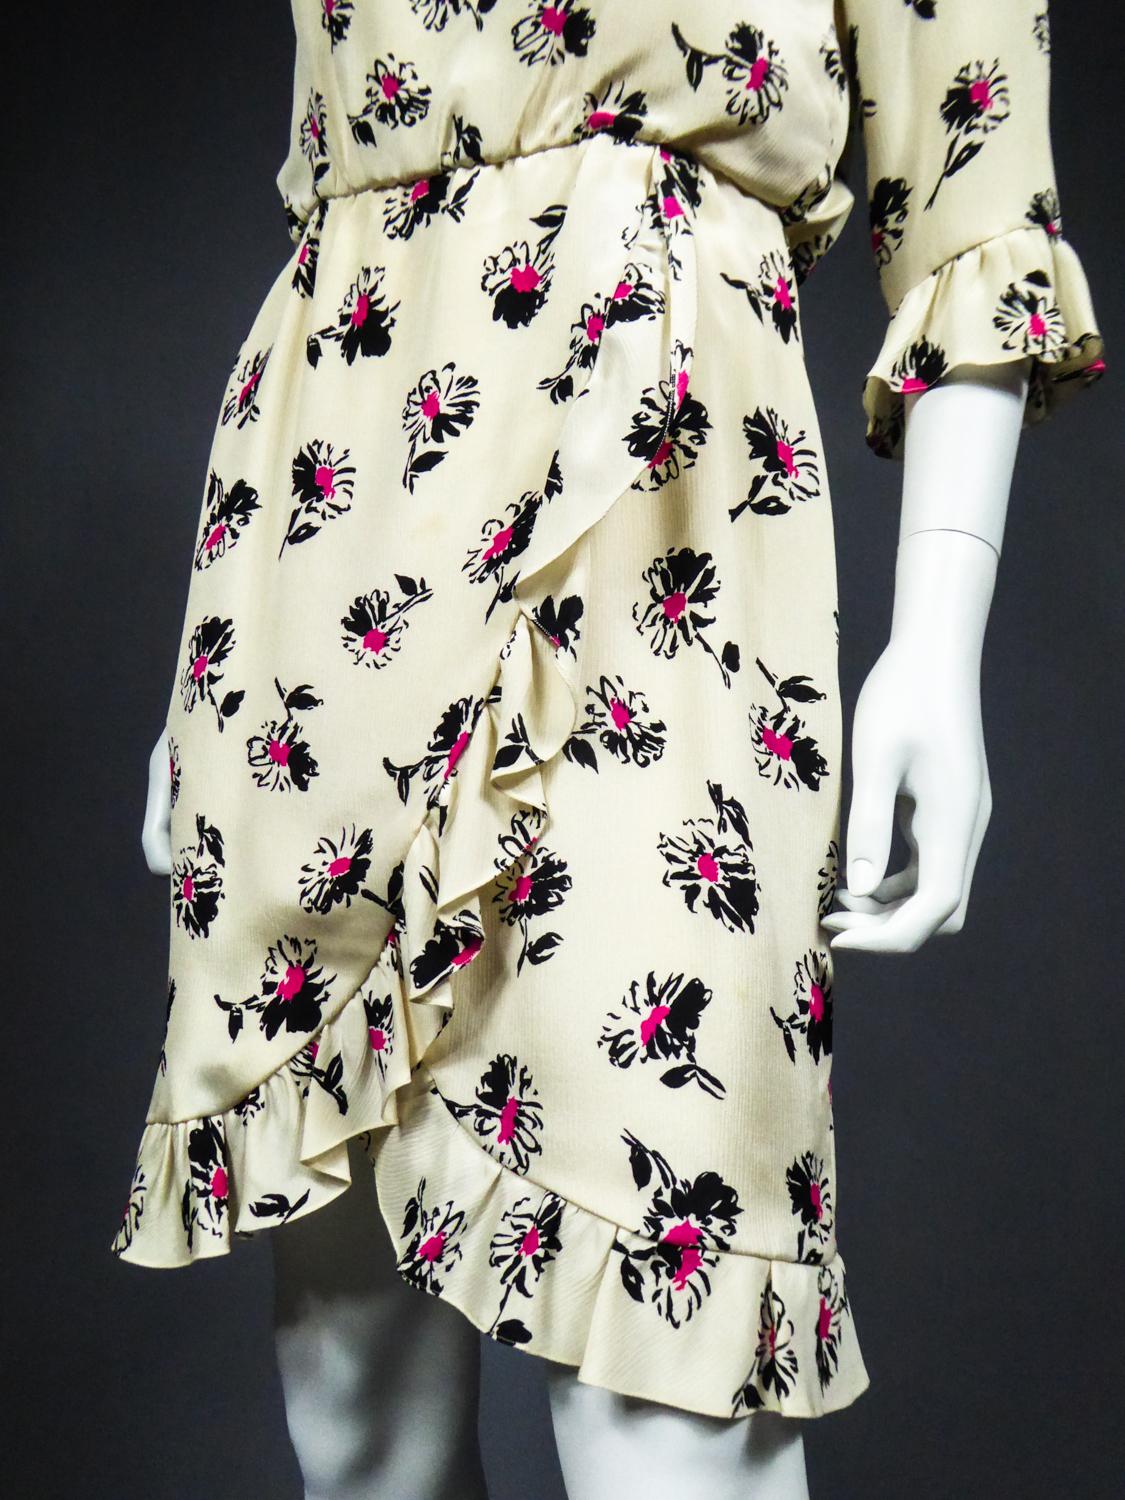 An Yves Saint Laurent Haute Couture Summer Dress Numbered 61685 - 1987 Fall 6